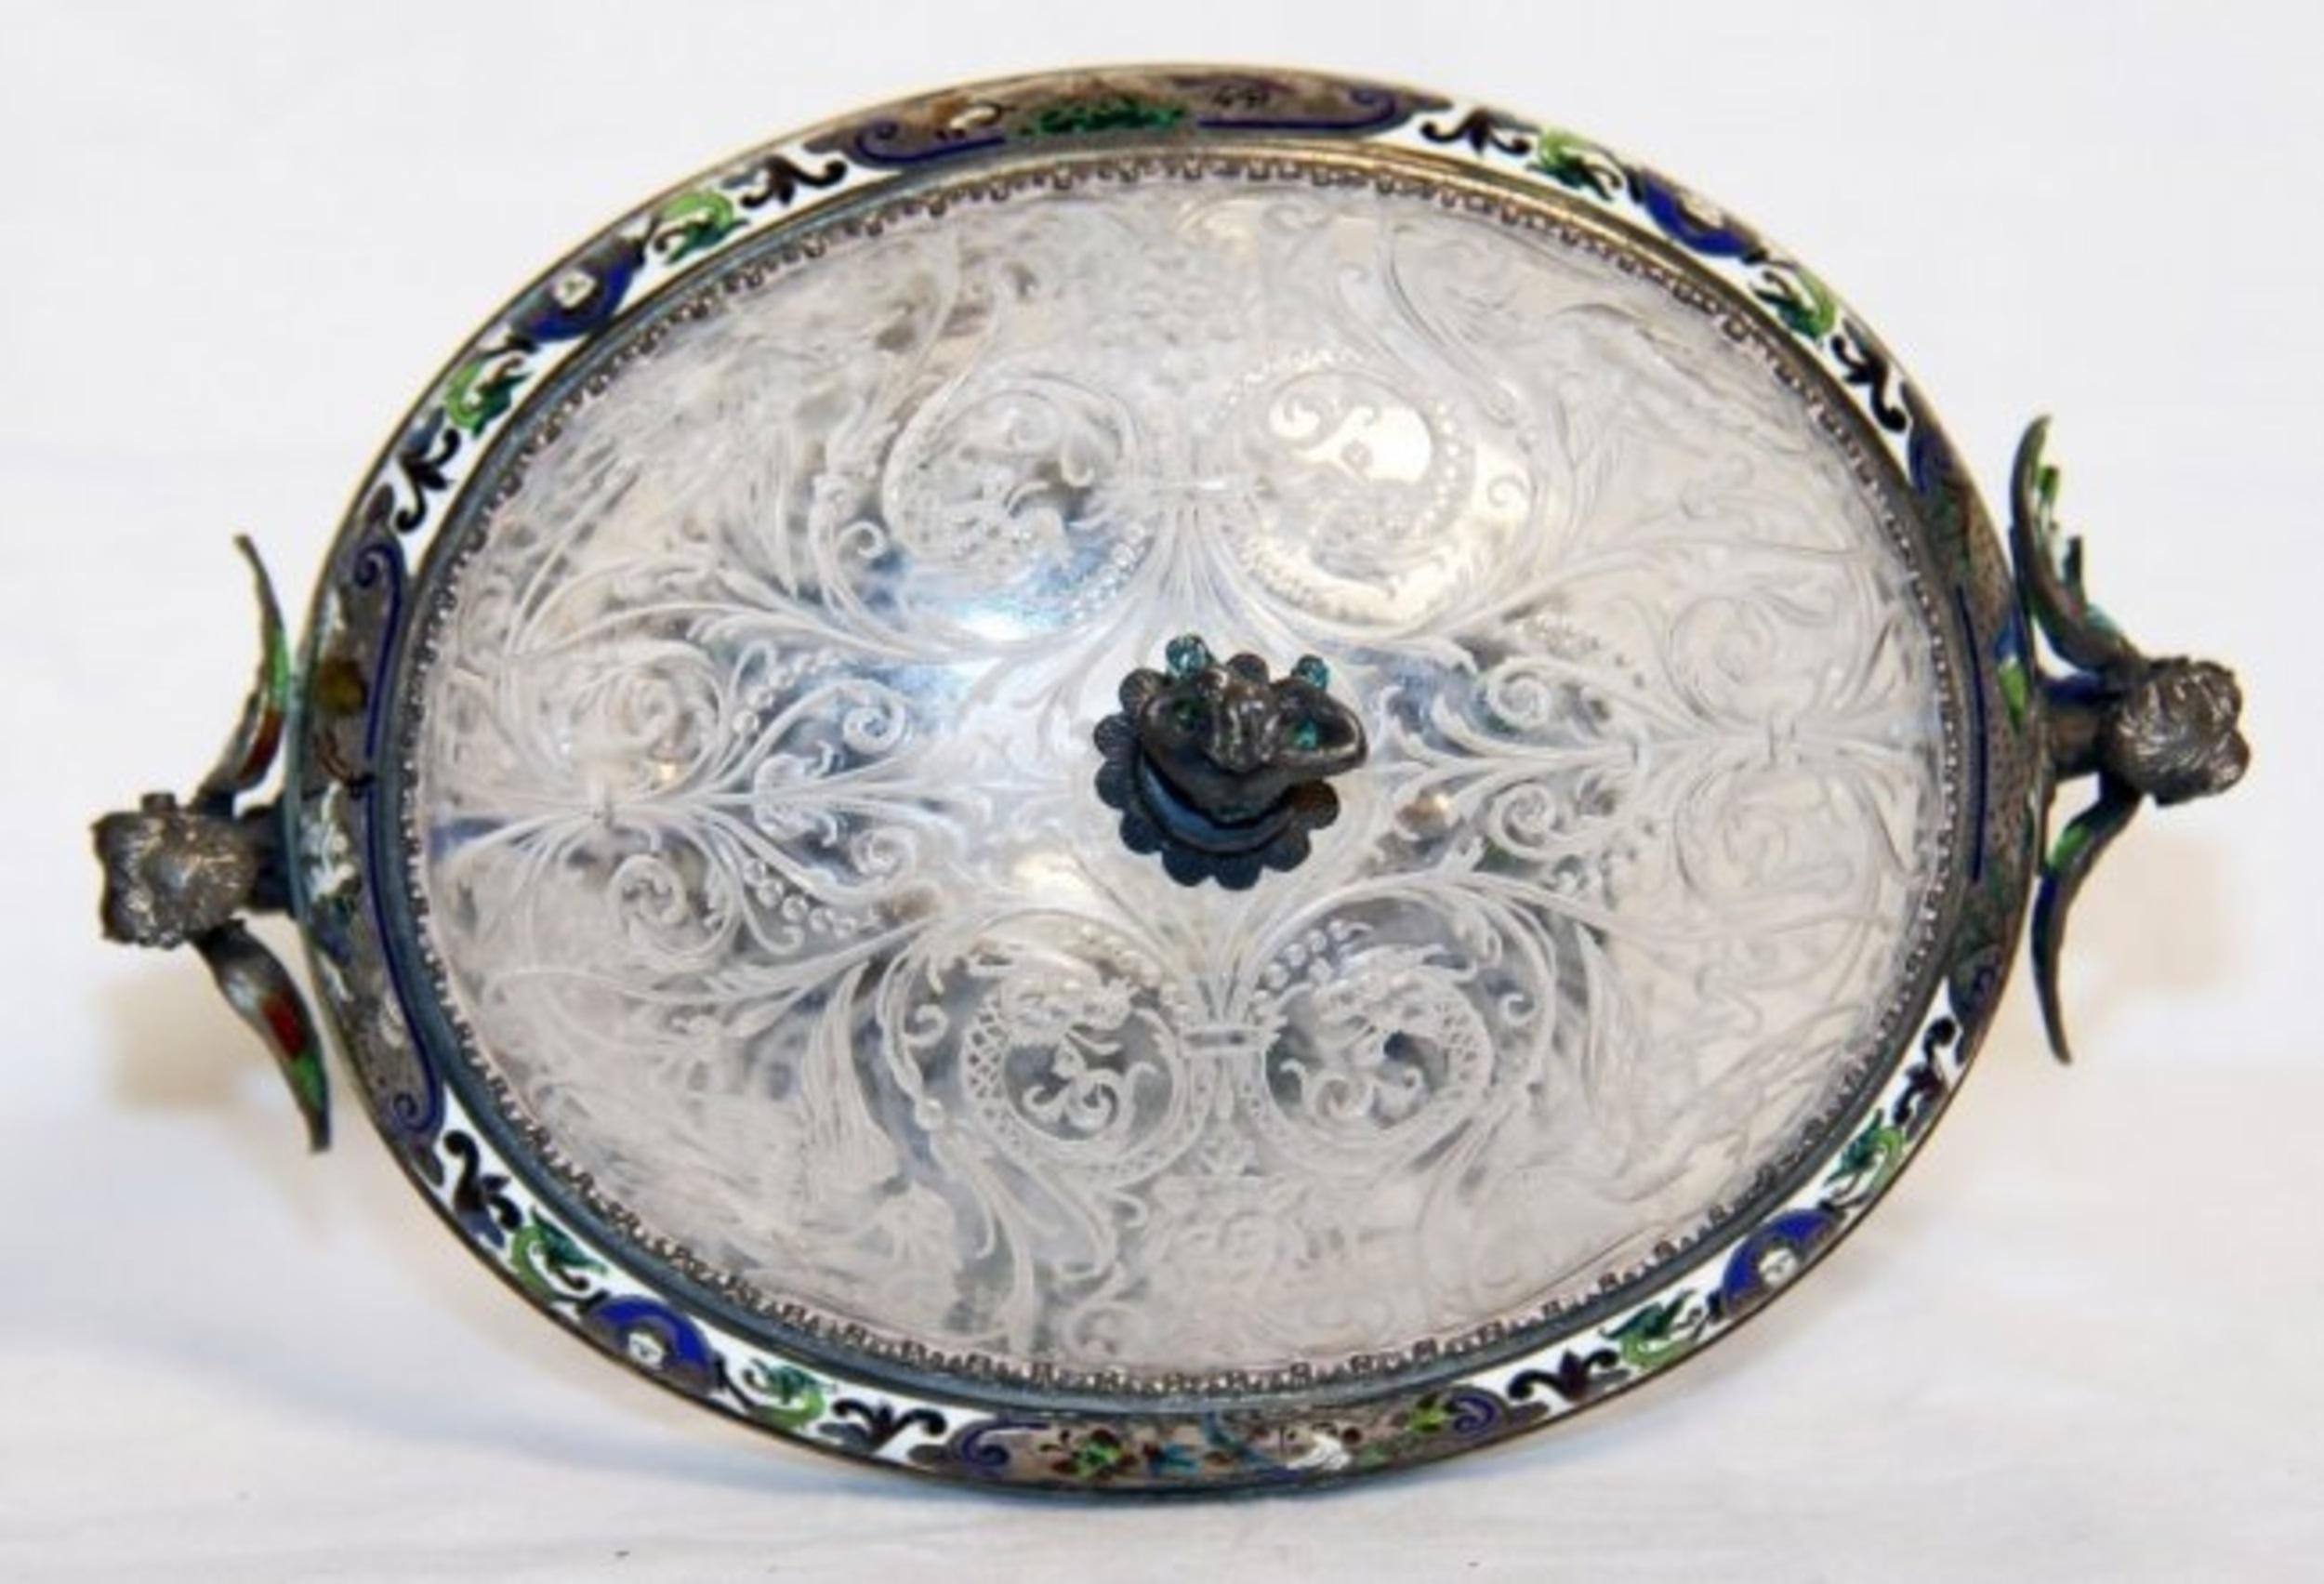 Viennese mannerist style enameled silver and rock crystal coupe and cover, by Herman Bohm, last quarter 19th century, the silver mounts to base and cover with Austrian hallmarks, and maker mark for Herman Bohm.
Measures: Height 5 1/4 in.